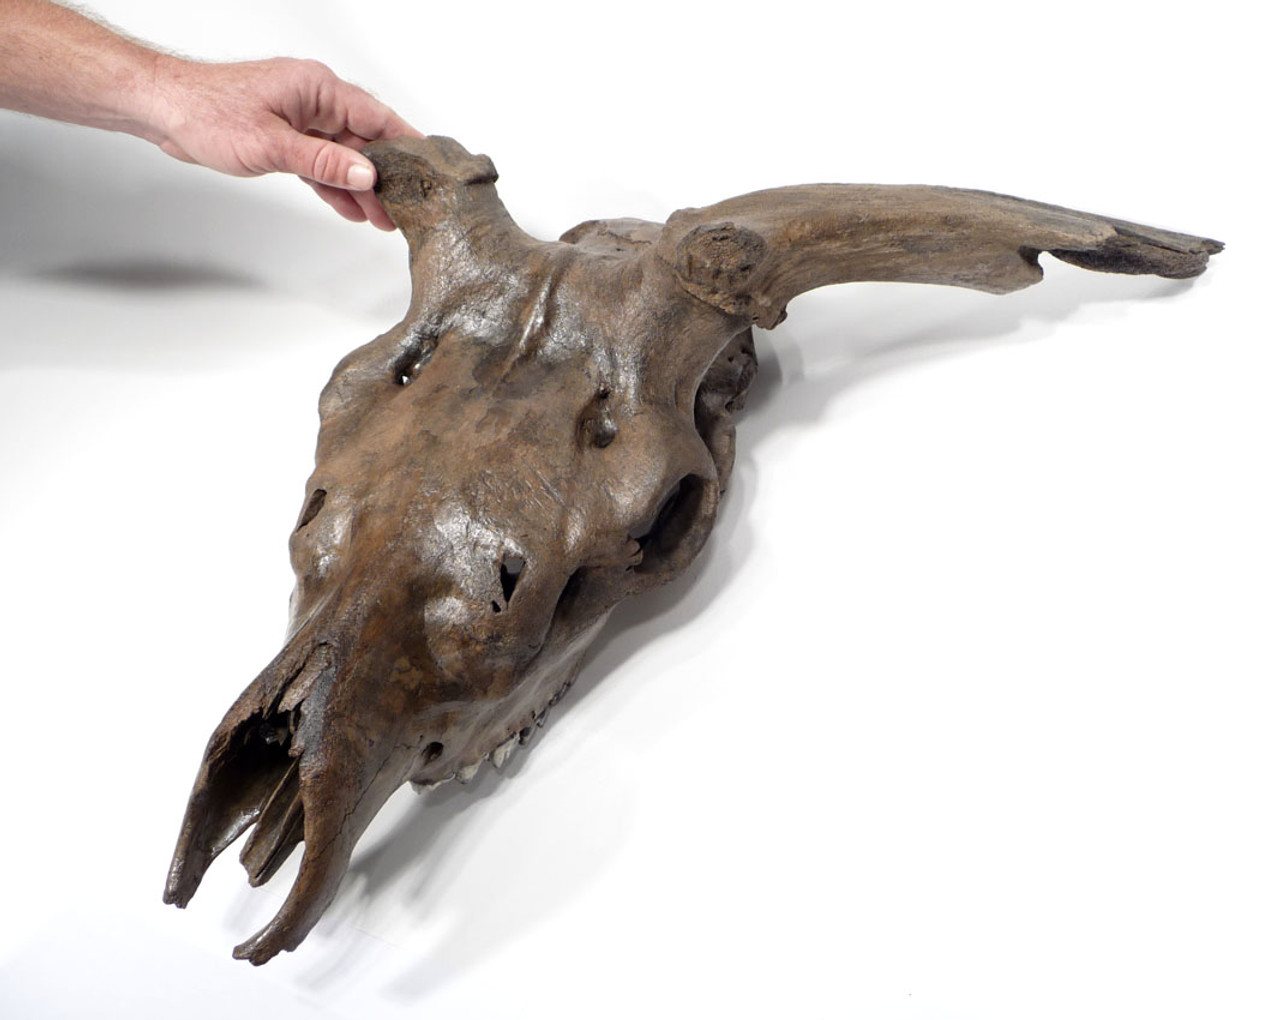 EXTREMELY RARE INTACT MEGALOCEROS GIANT DEER IRISH ELK FOSSIL SKULL WITH COMPLETE ORIGINAL DENTITION *F9 